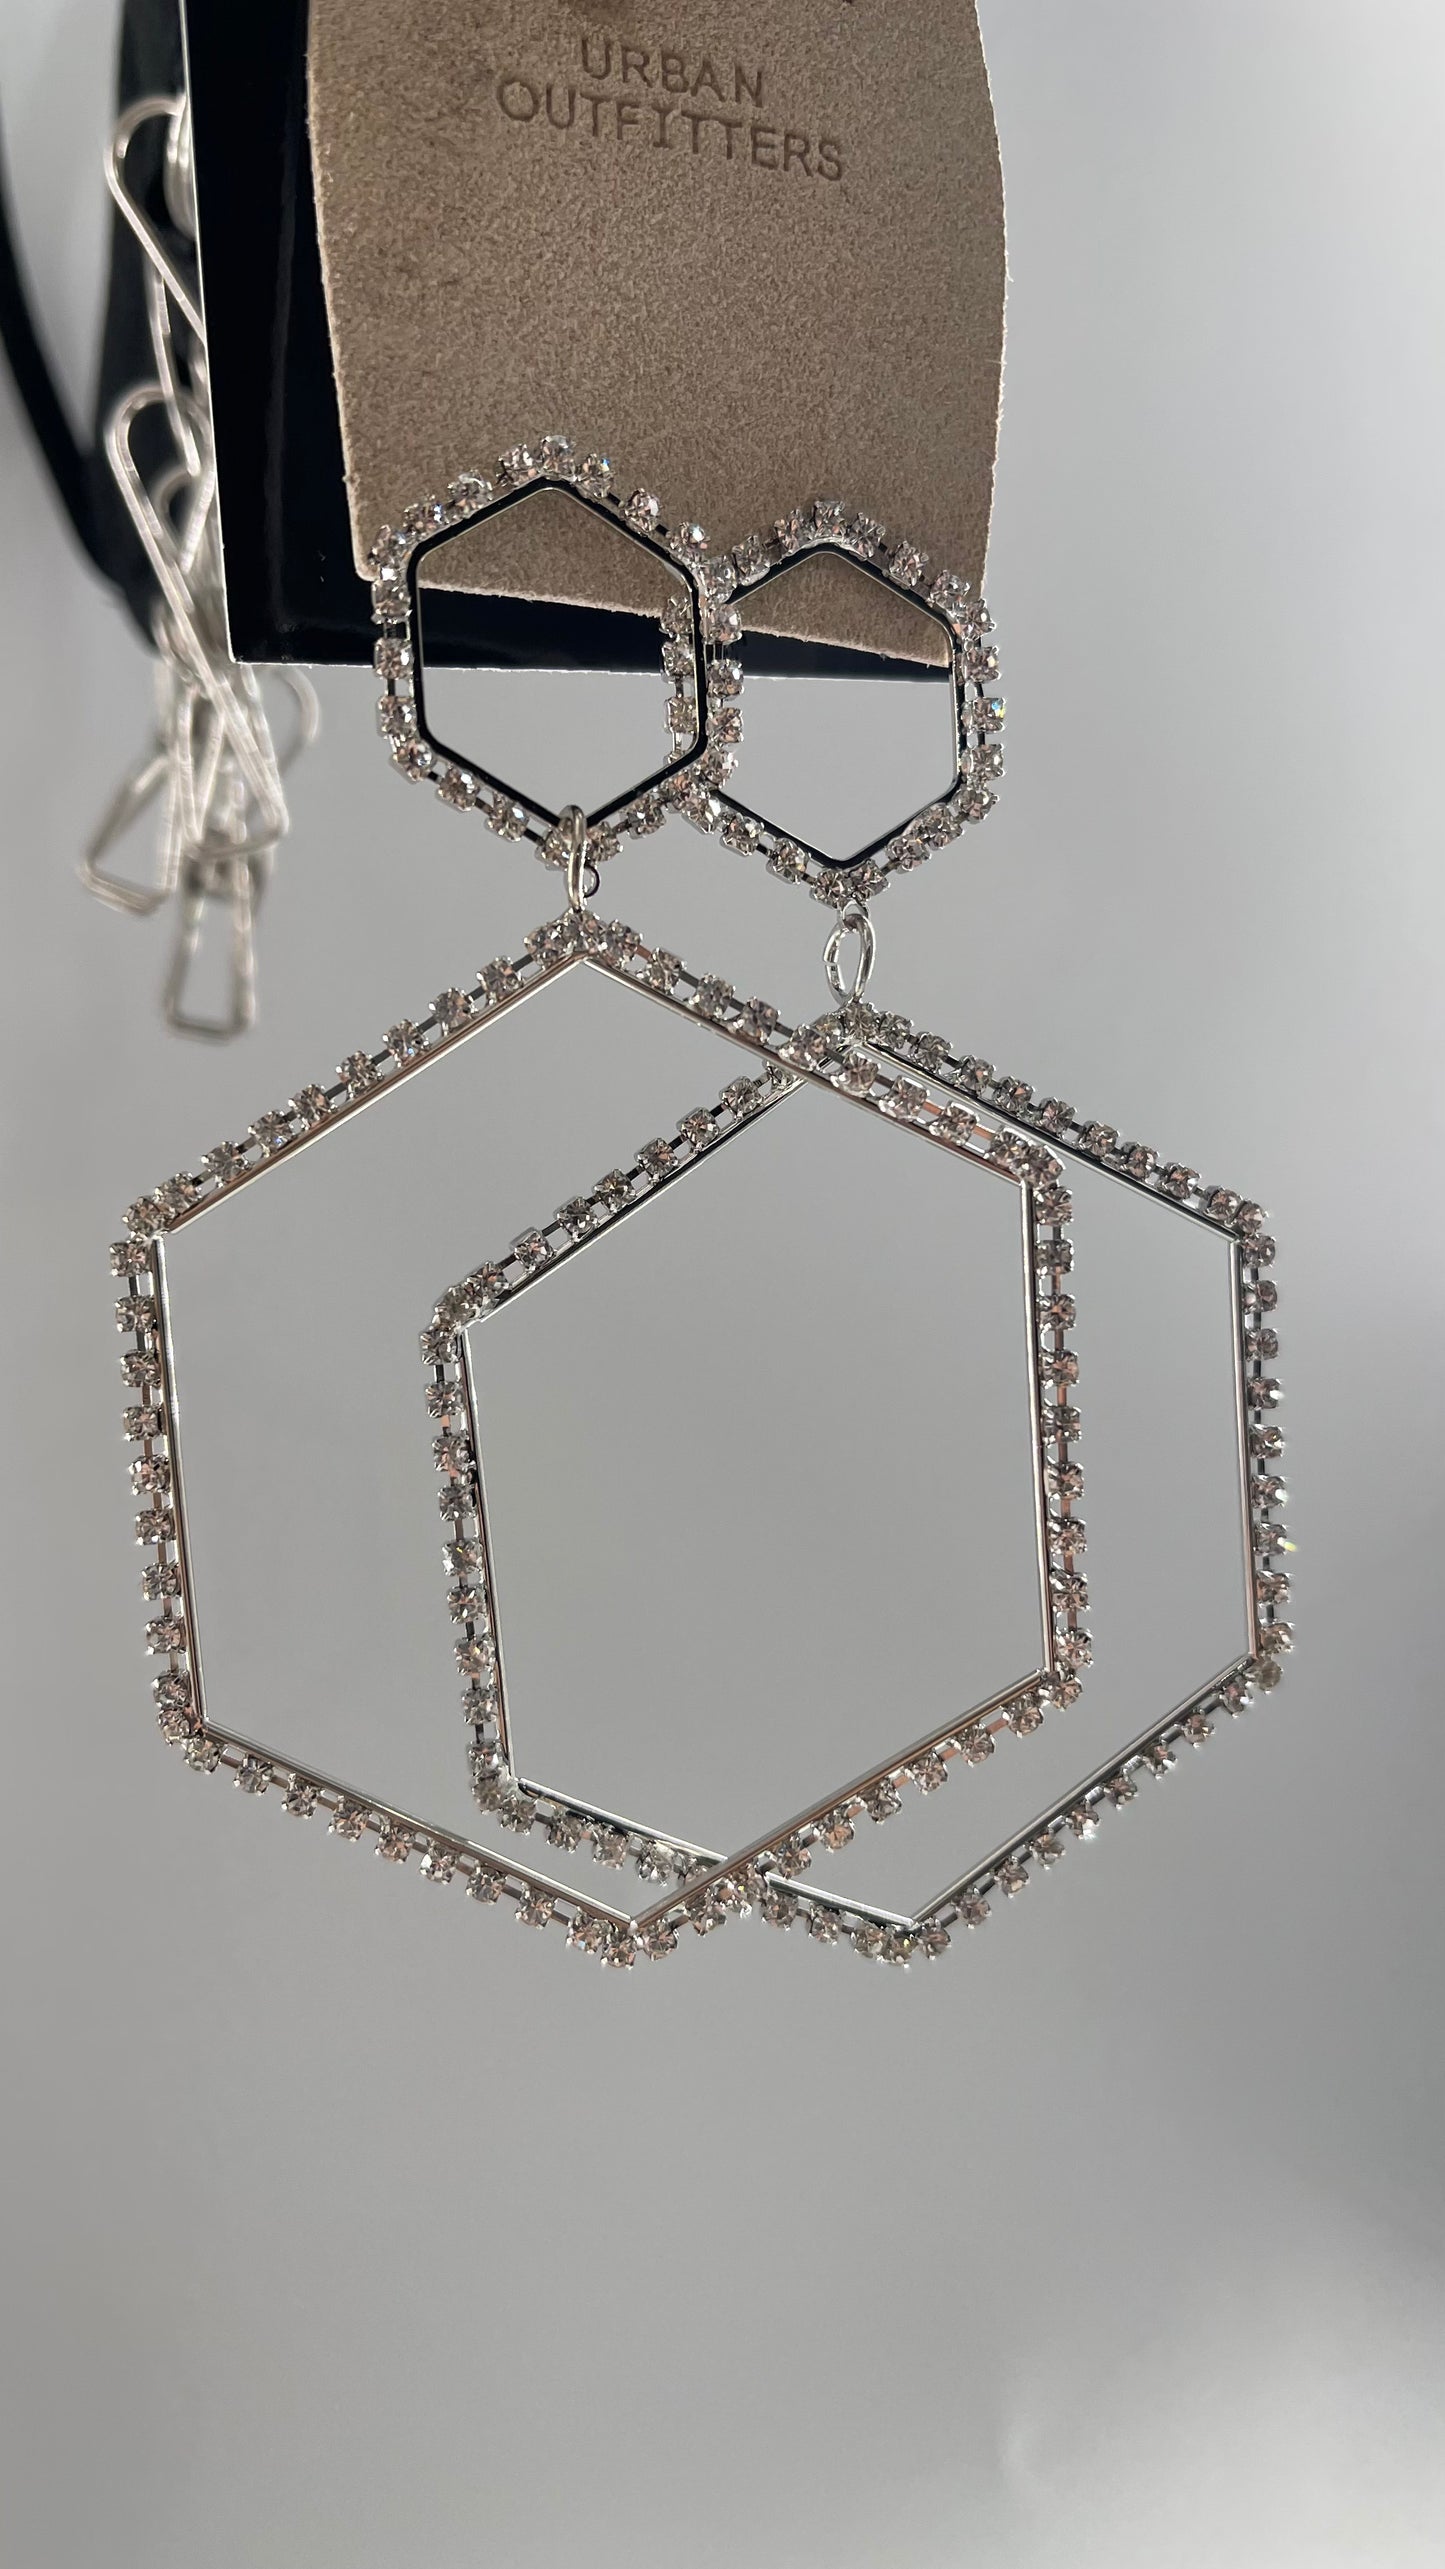 Urban Outfitters Crystal Hexagon Selena Statement Earing